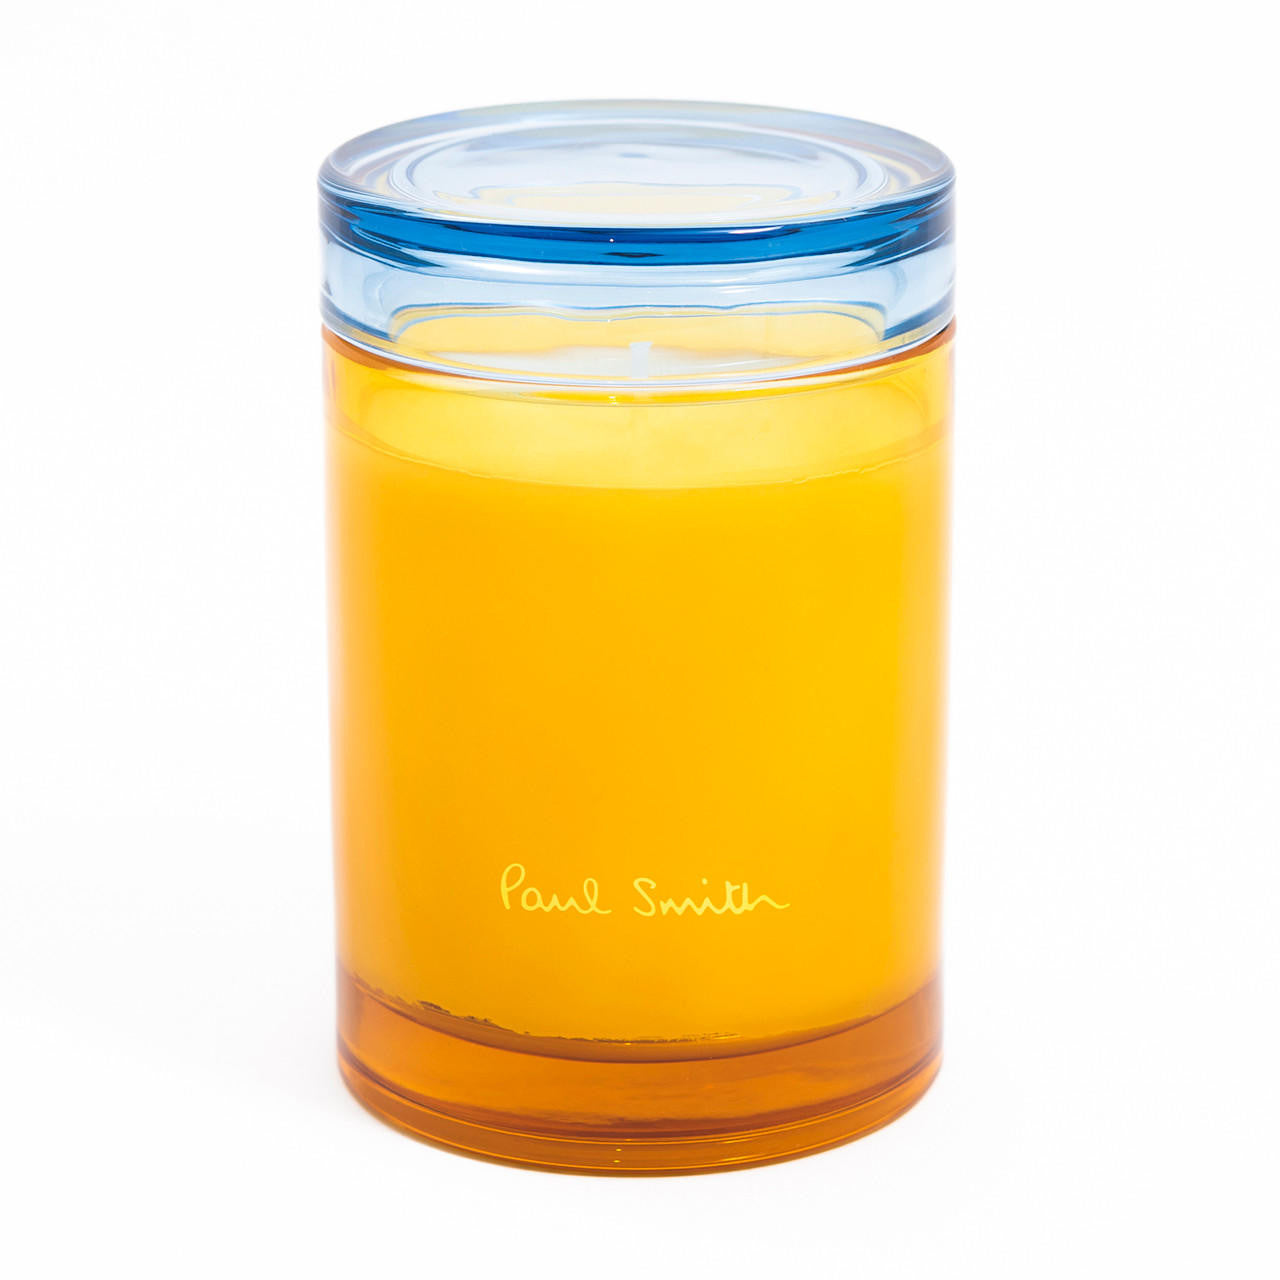  Paul Smith Day Dreamer 240g Candle 